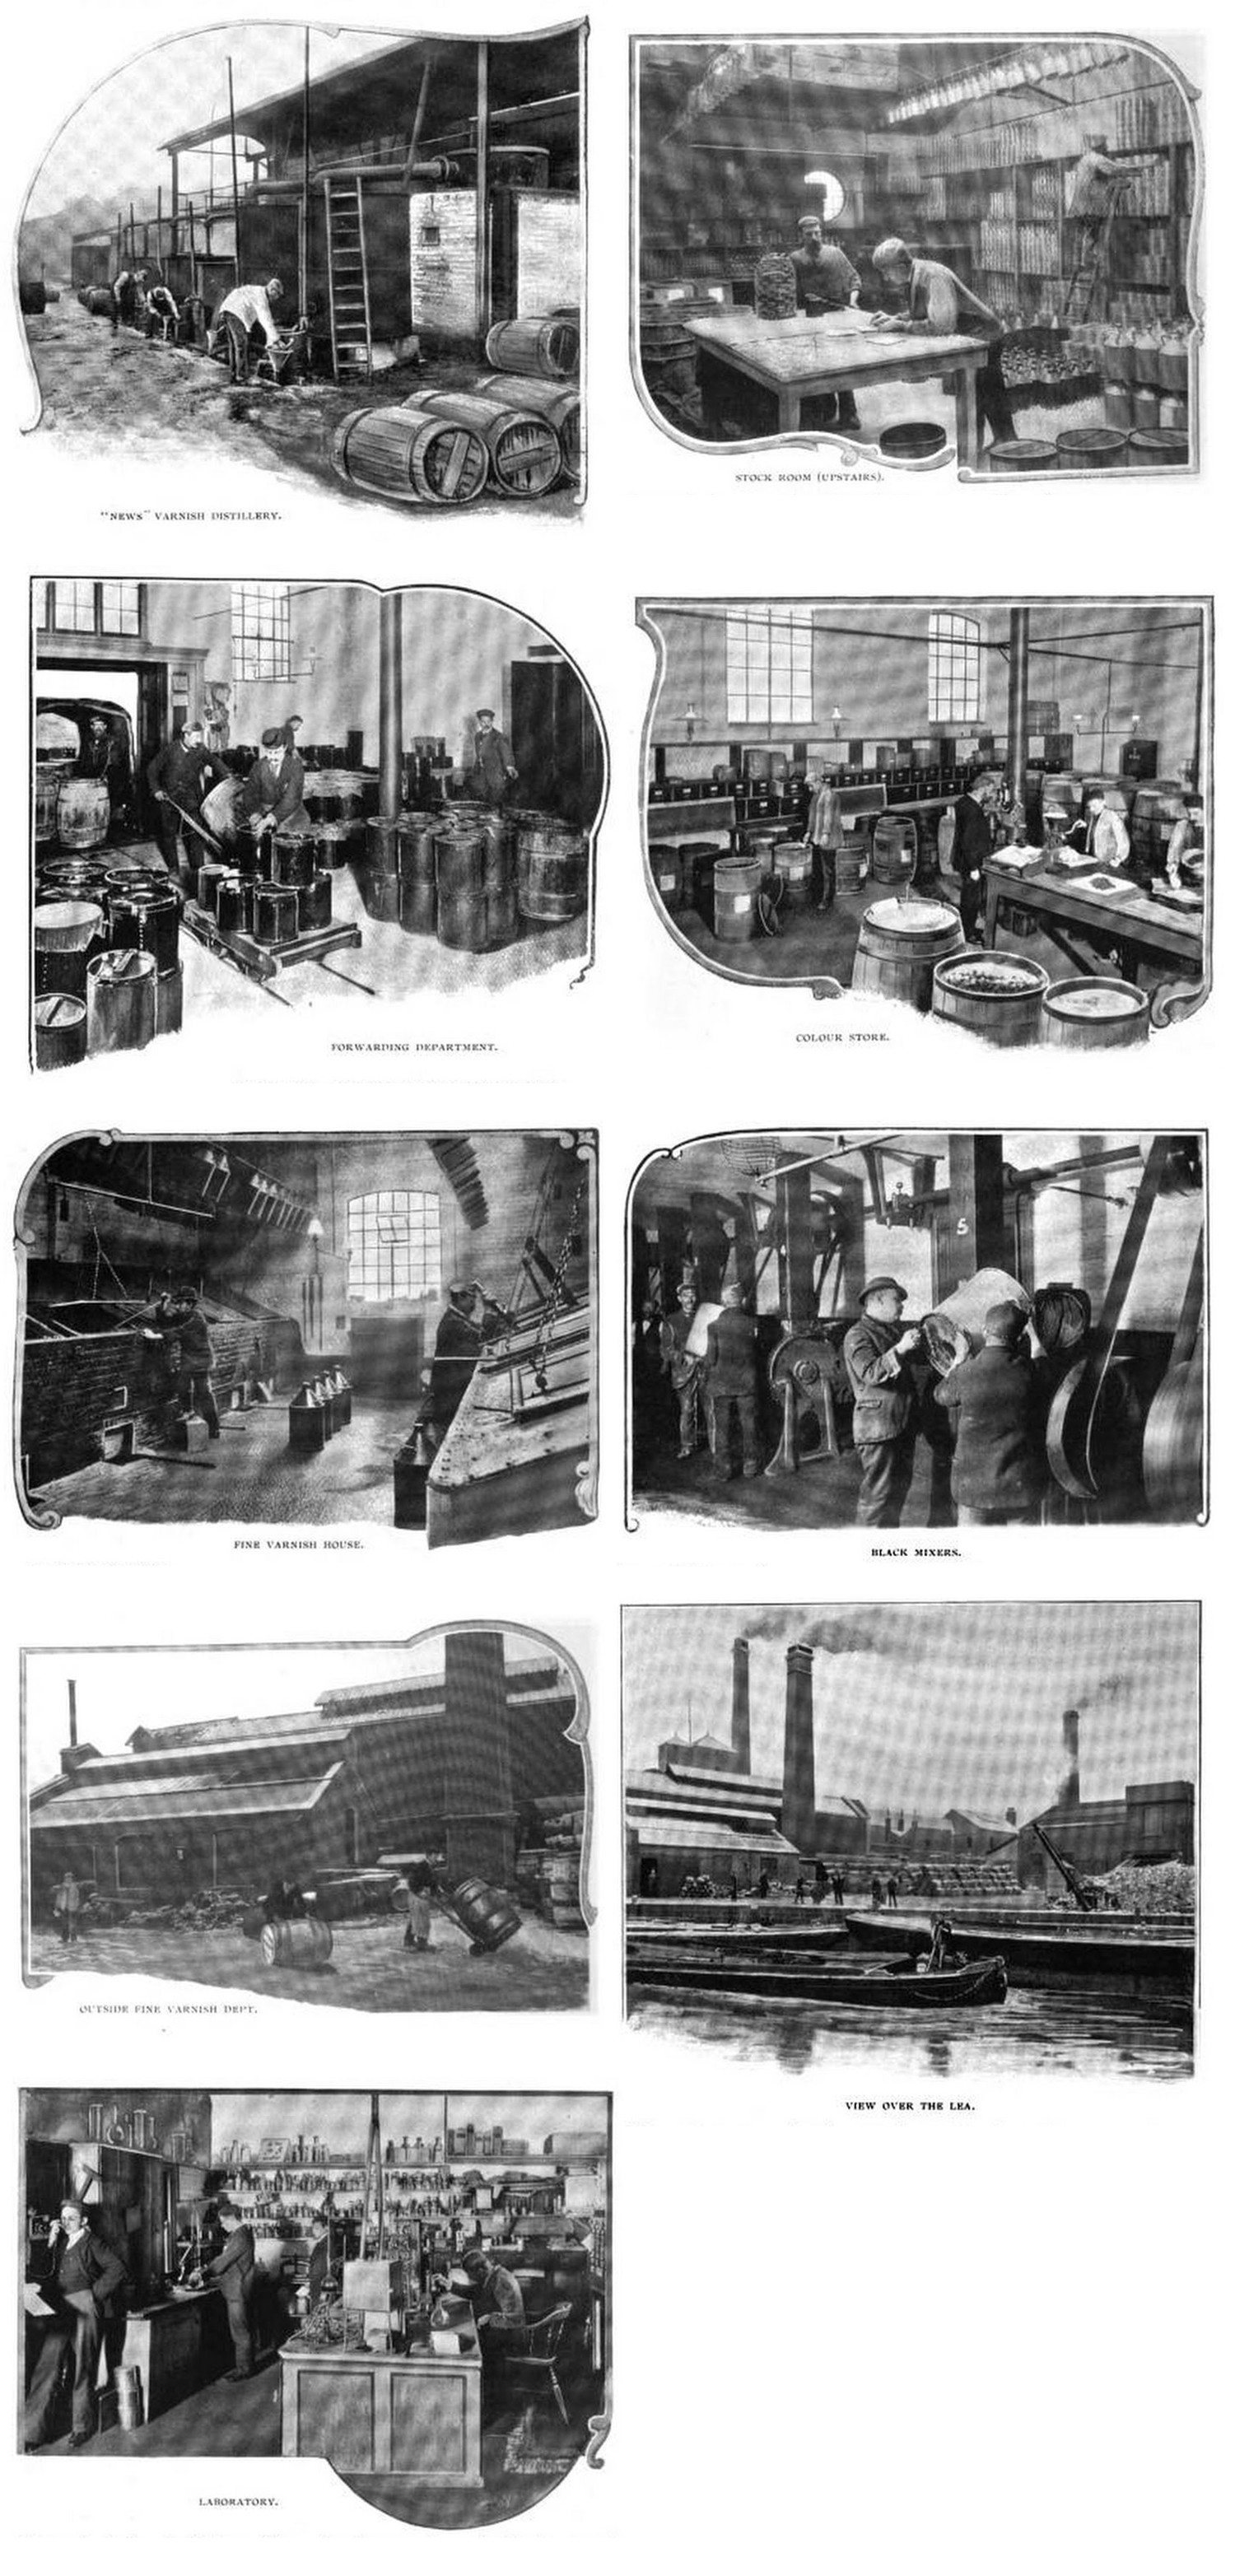 Images of Kidd & Co's Riverside Works on Fish Island